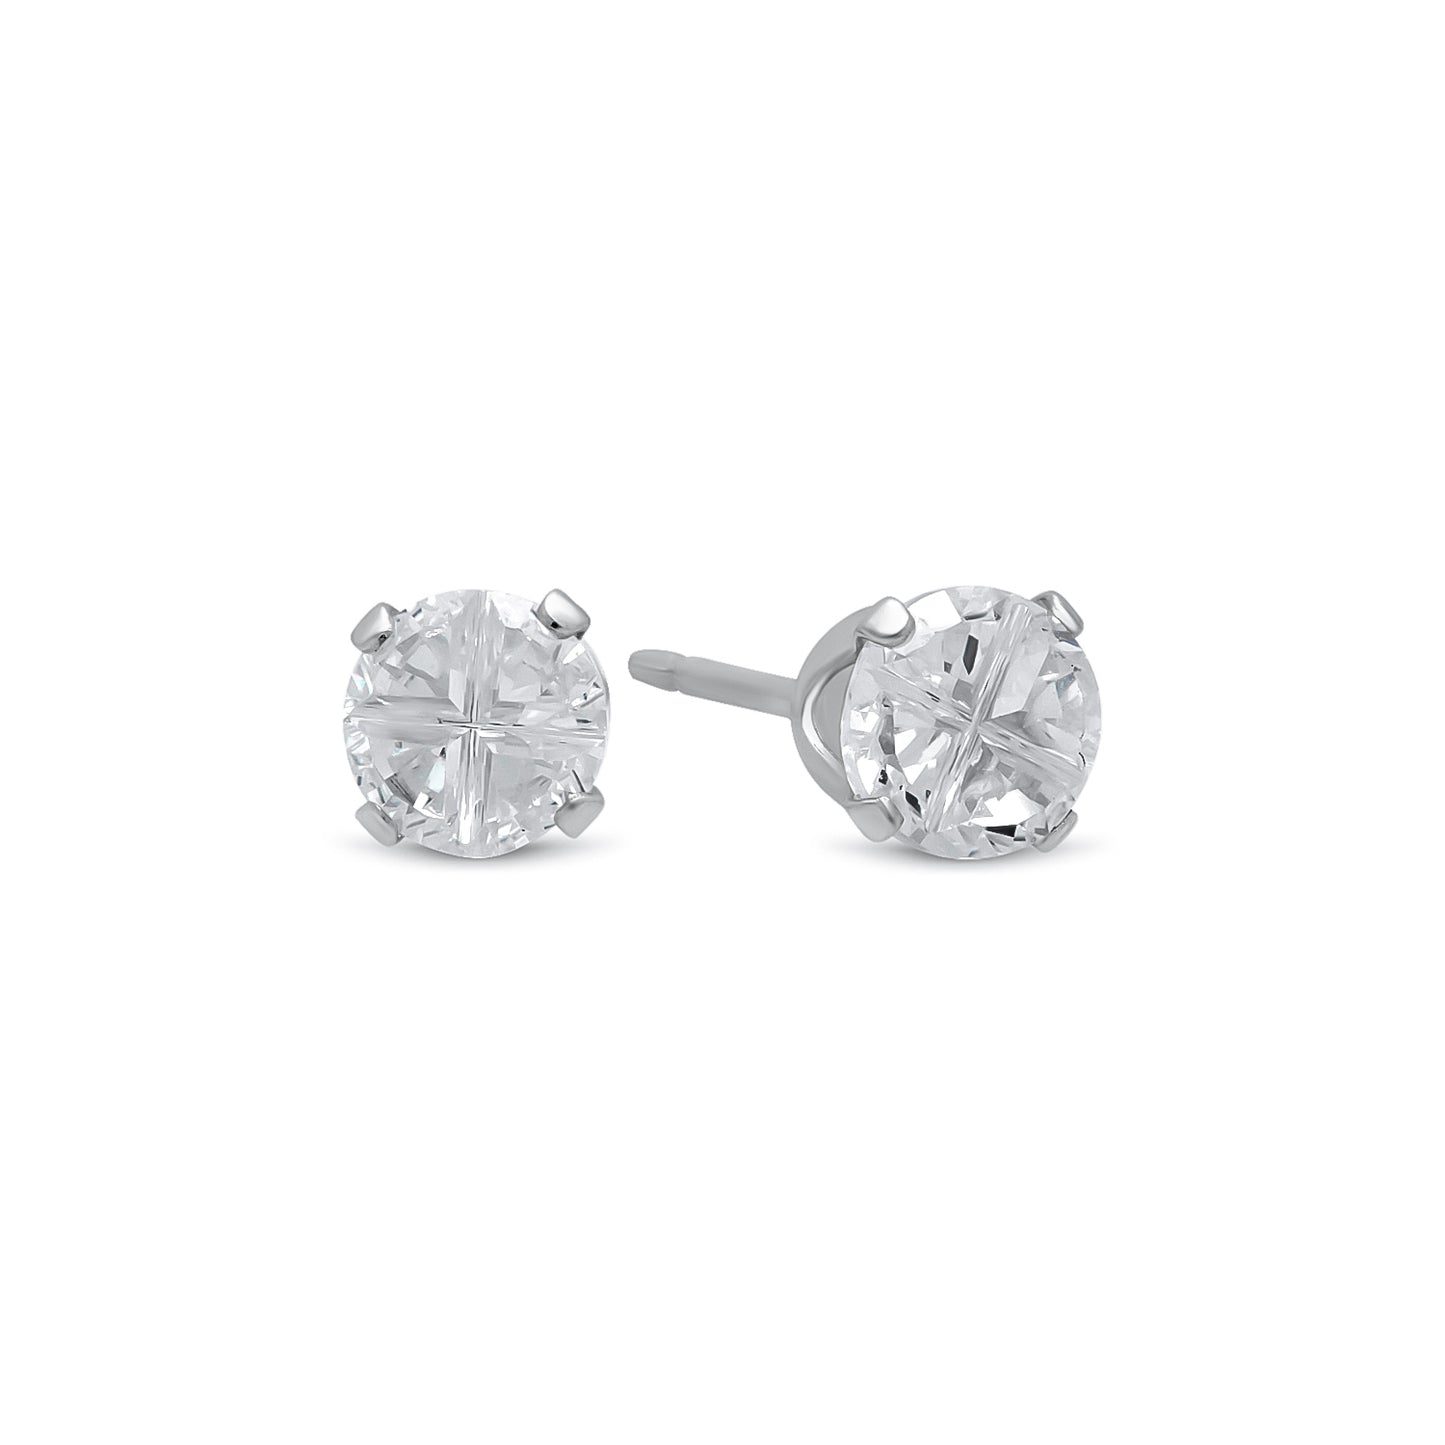 Sterling Silver Italian Crafted Round Pattern Of Simulated Diamond CZ Stud Earrings + Polishing Cloth (SKU: SS-ER2282)